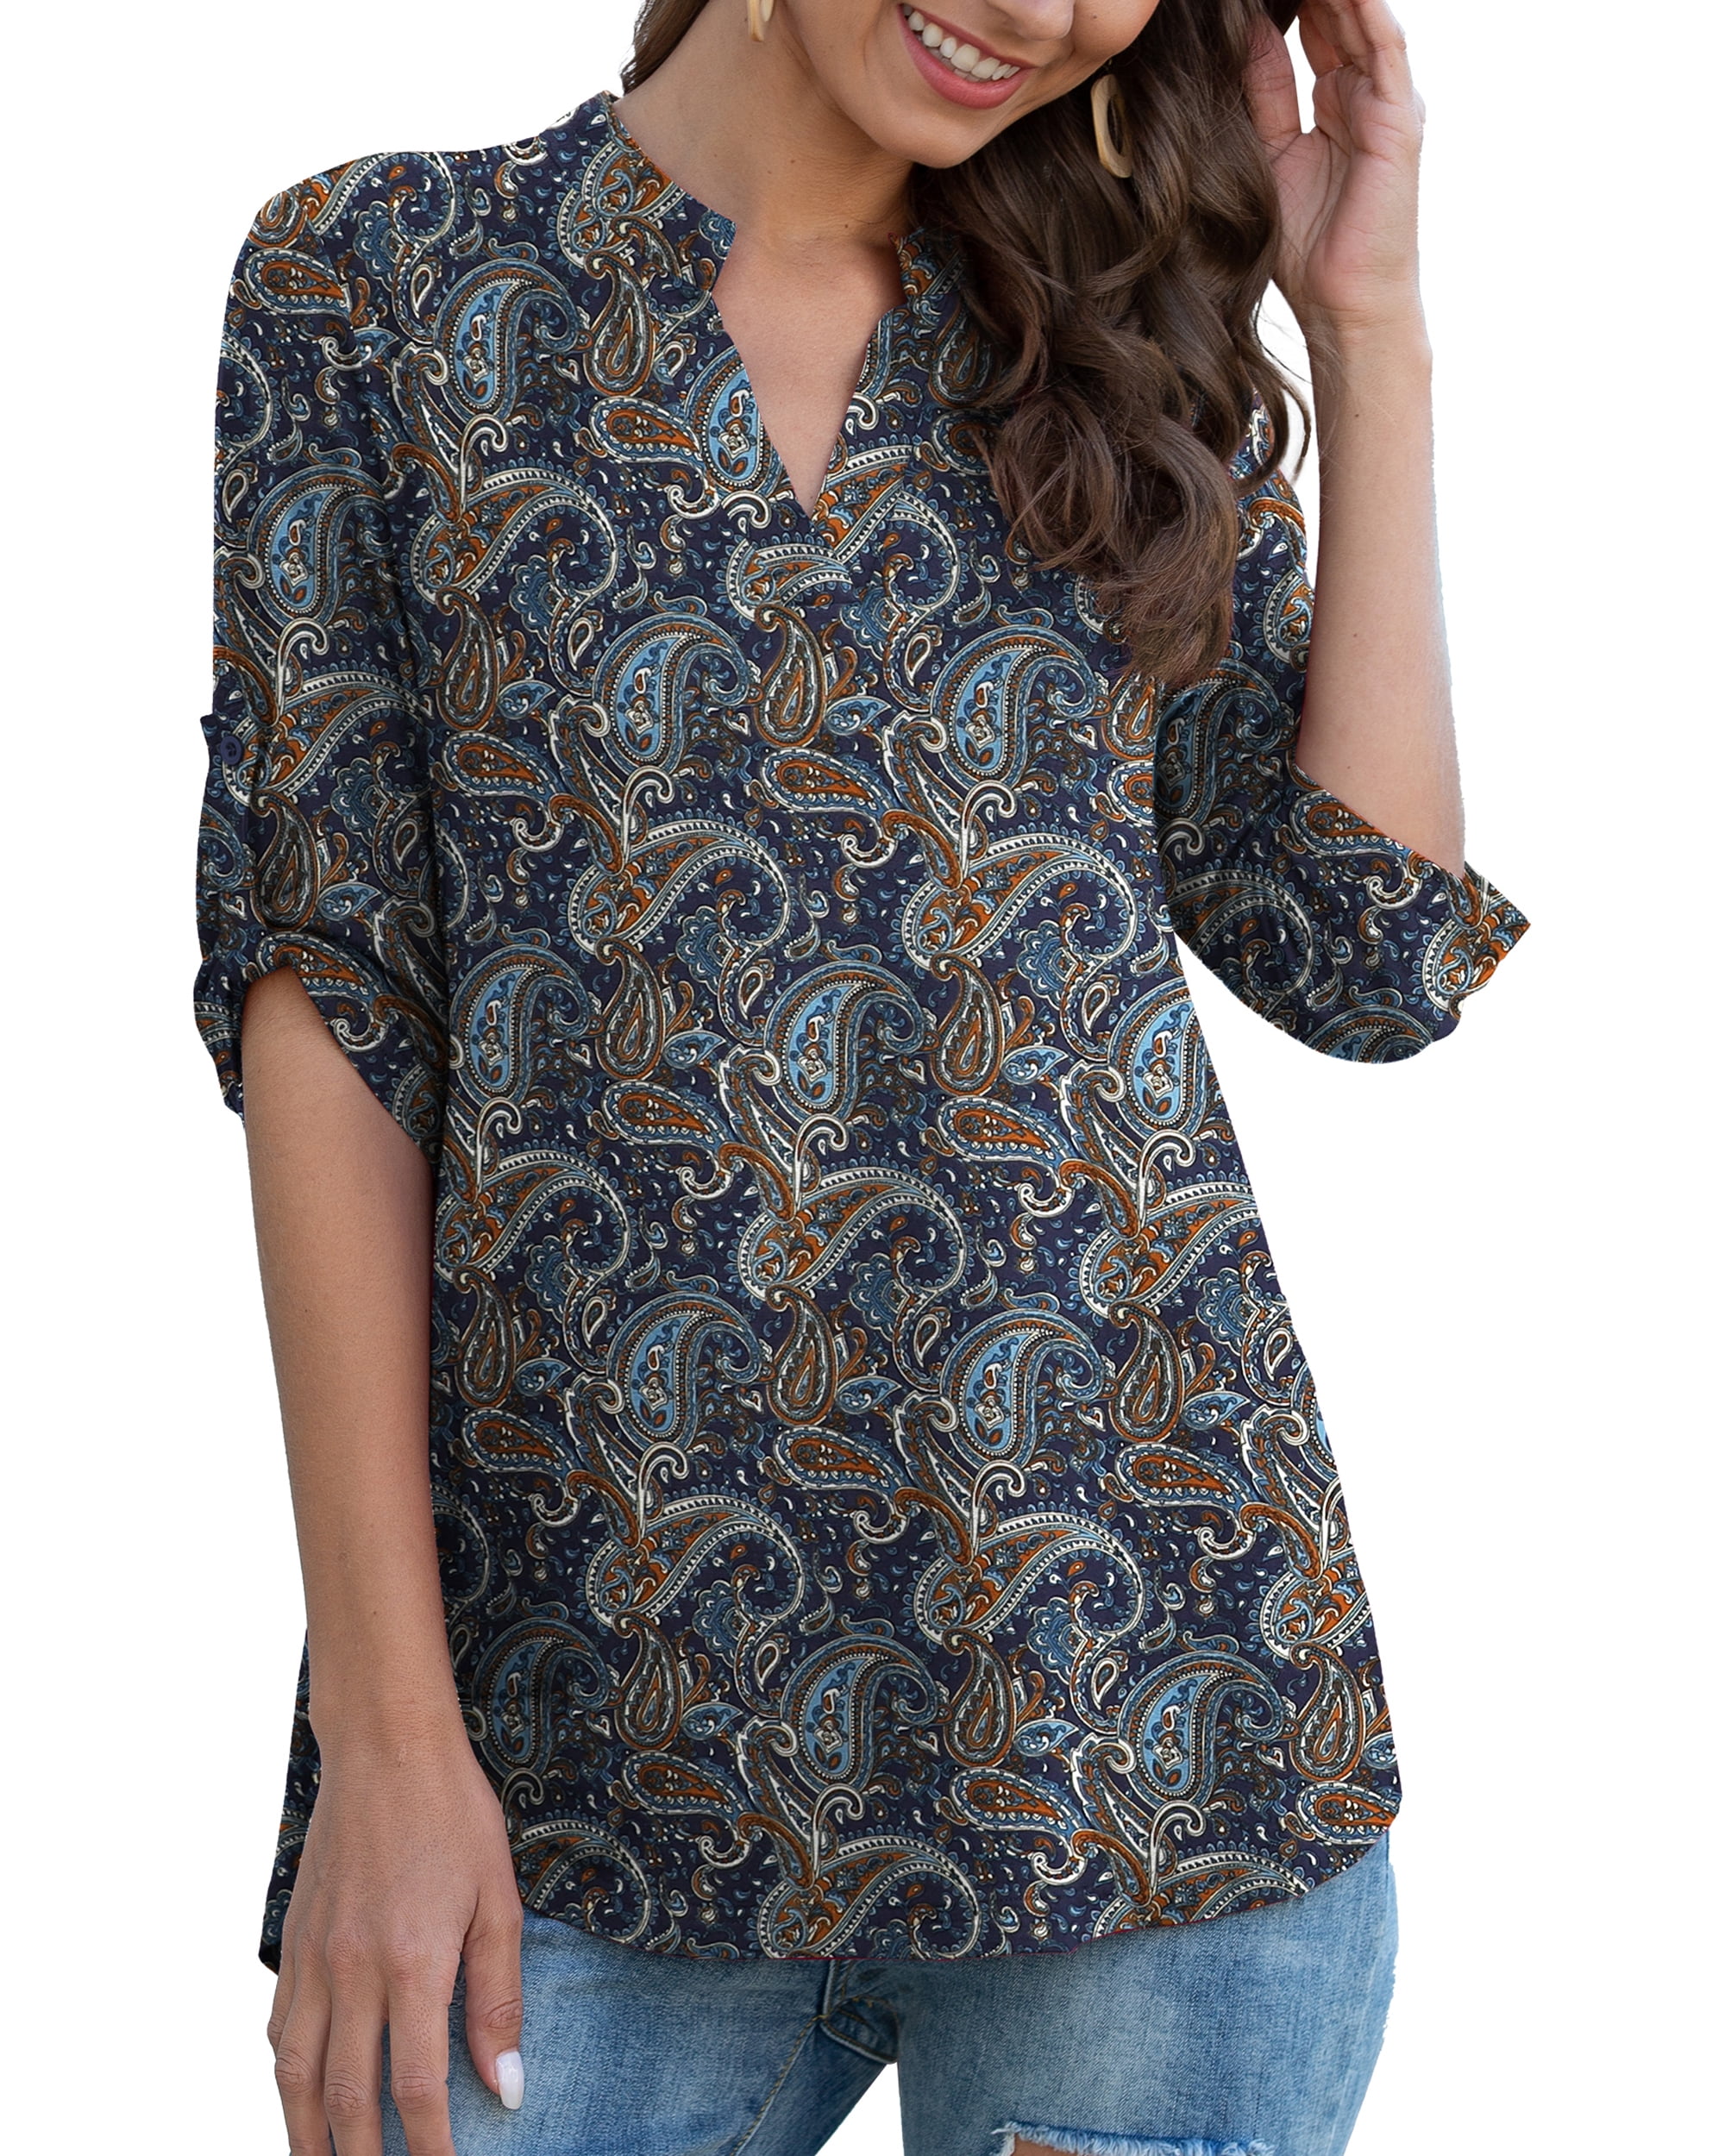 a.Jesdani Womens Plus Size Tunic Tops 3/4 Sleeve Casual Floral Henley ...